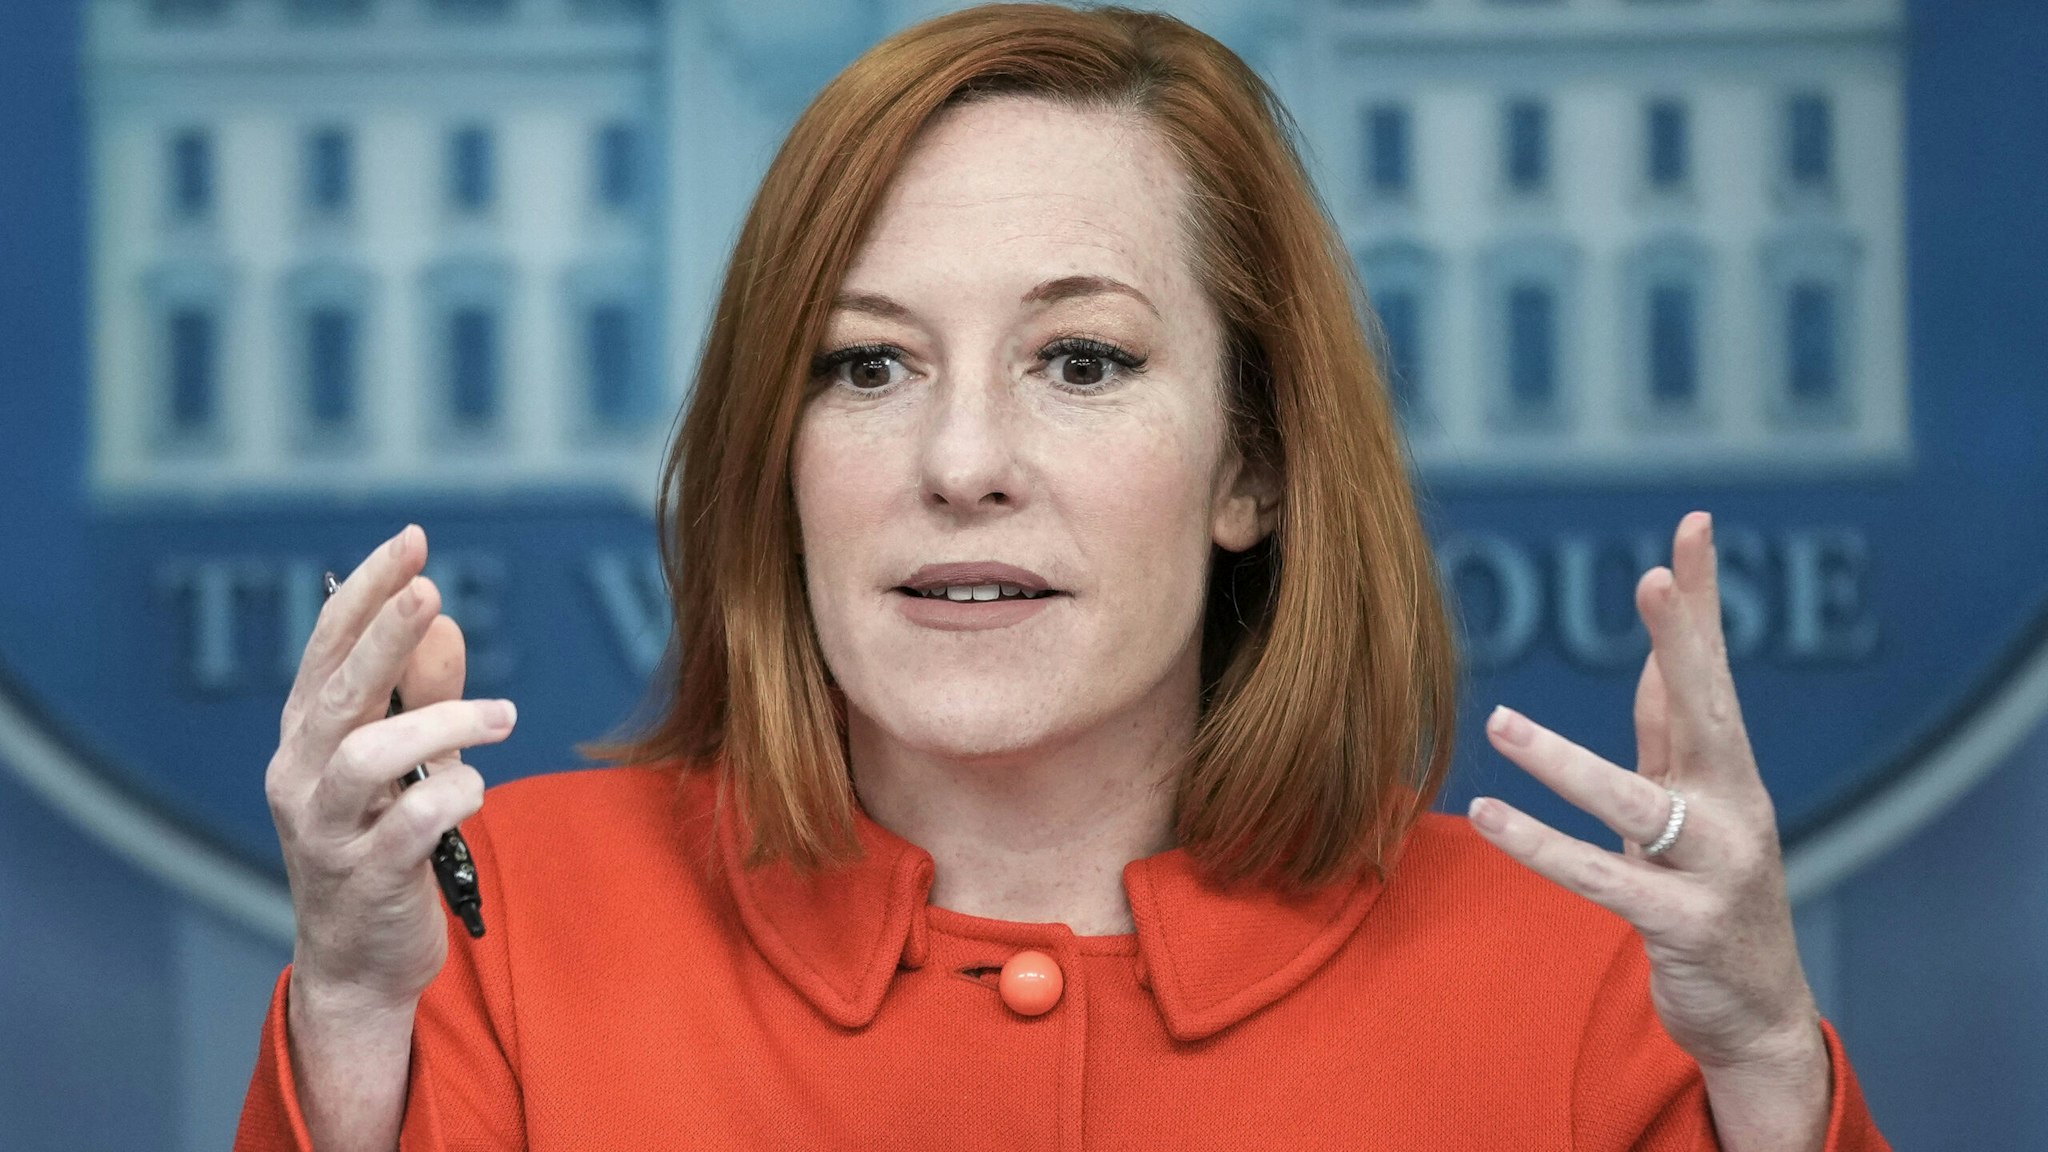 WASHINGTON, DC - APRIL 11: White House Press Secretary Jen Psaki speaks during the daily press briefing at the White House April 11, 2022 in Washington, DC. Psaki spoke about President Bidens meeting with Prime Minister of India Narendra Modi and Bidens afternoon event about gun violence.